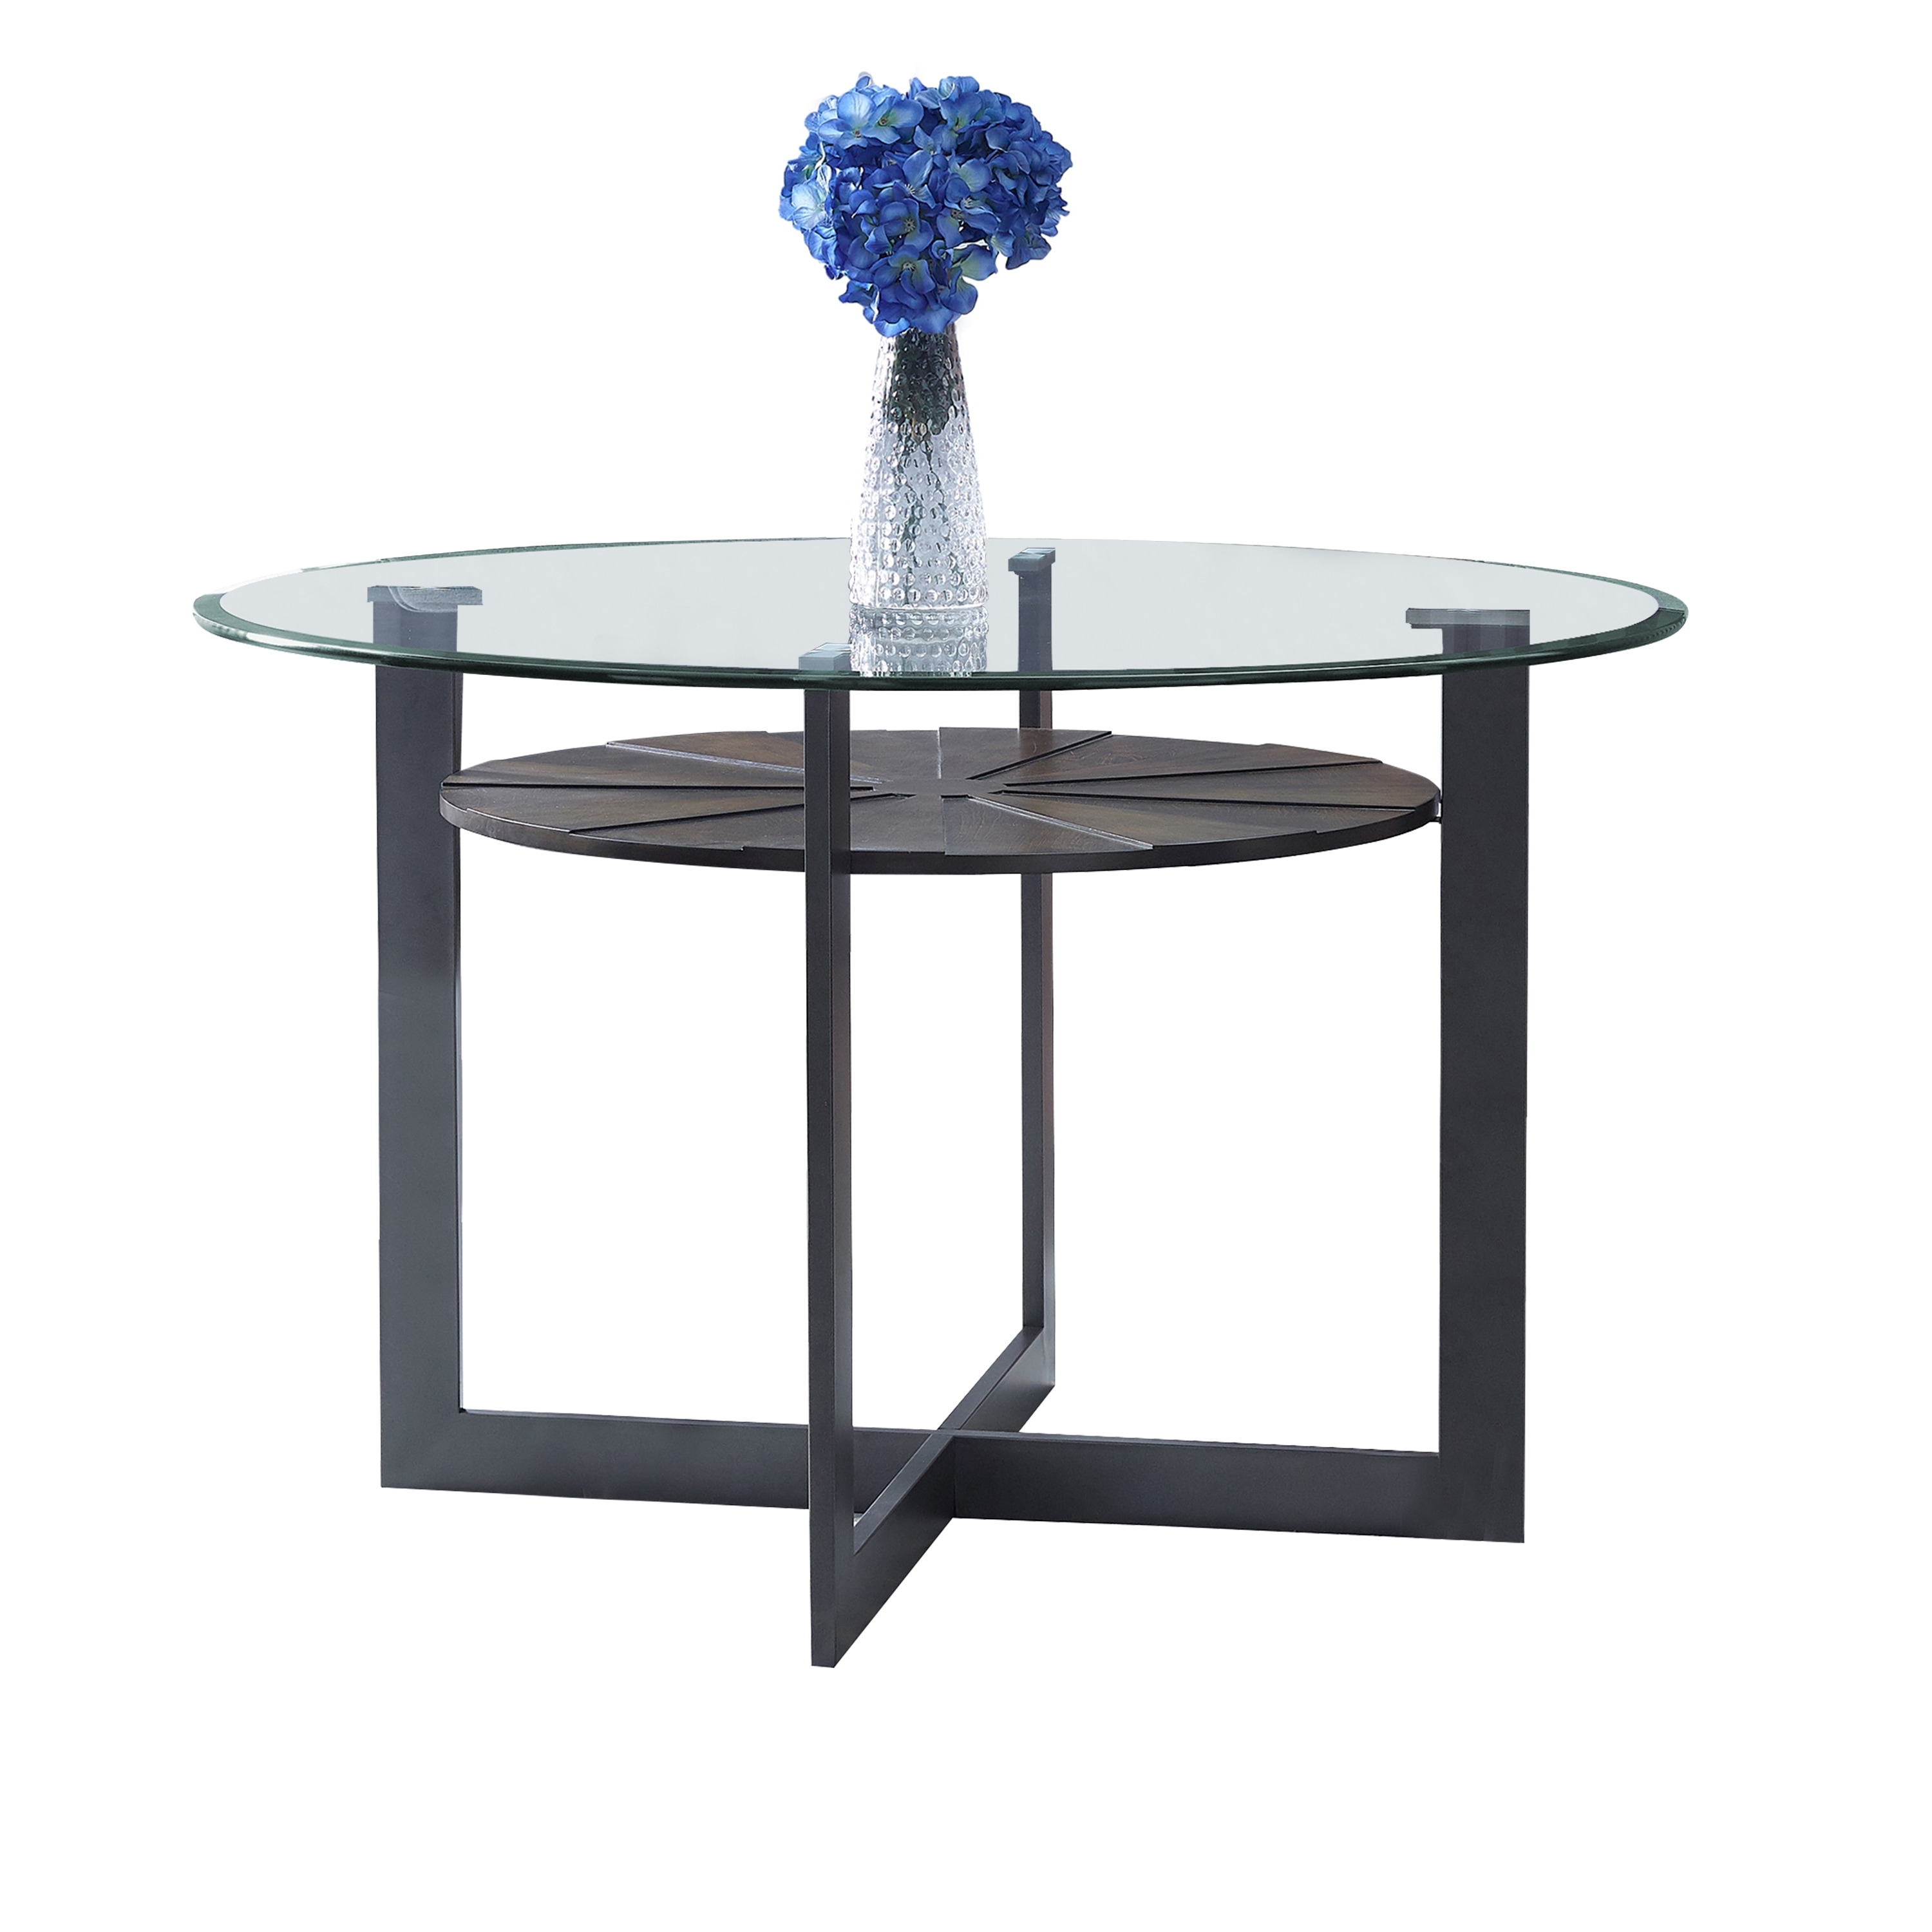 Orrick 48 Inch Round Glass Top Dining Table By Greyson Living Charcoal On Sale Overstock 28566302